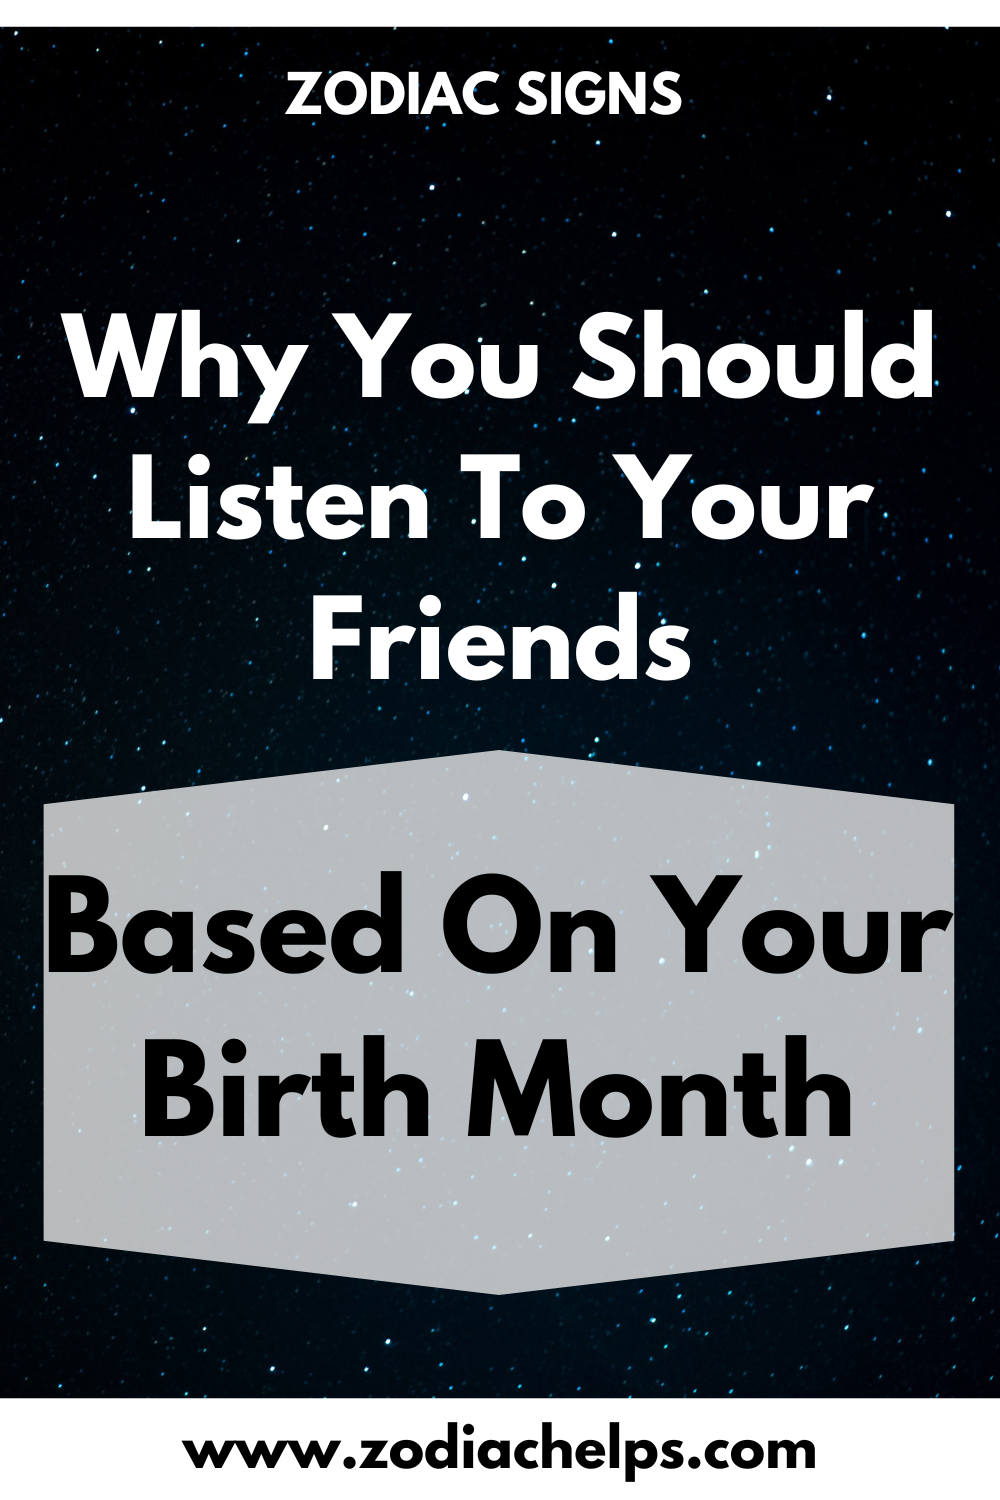 Why You Should Listen To Your Friends, Based On Your Birth Month